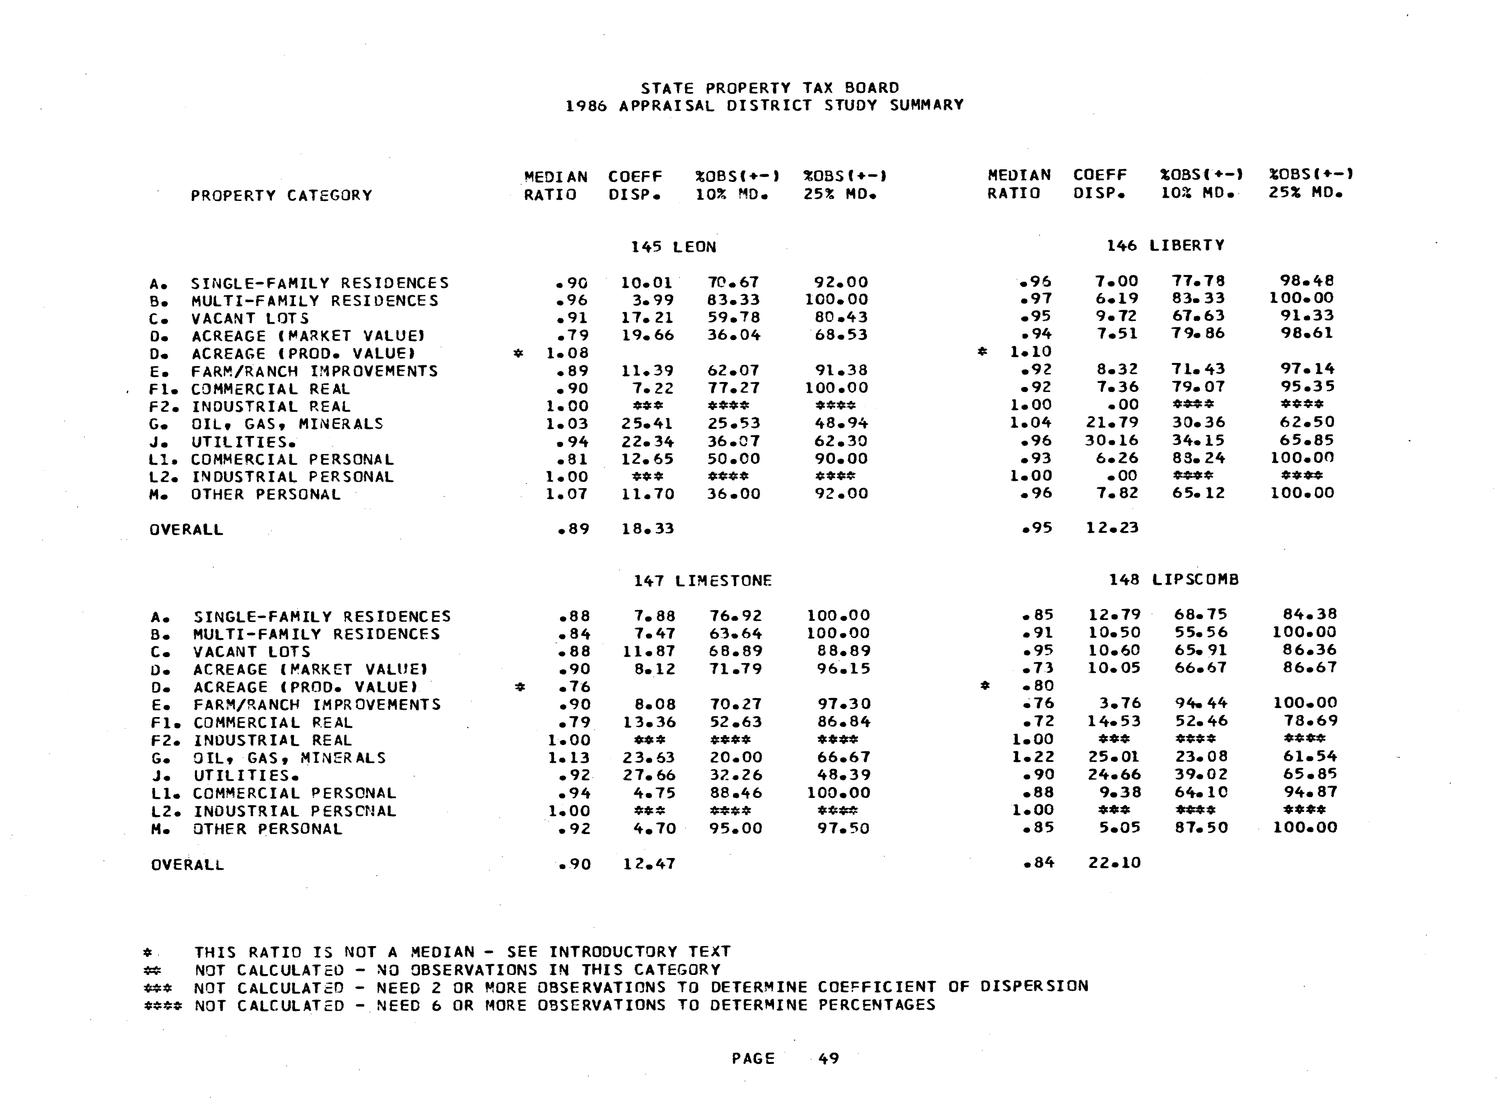 Texas School and Appraisal Districts' Property Value Study: Report of the Findings, 1986
                                                
                                                    PAGE49
                                                